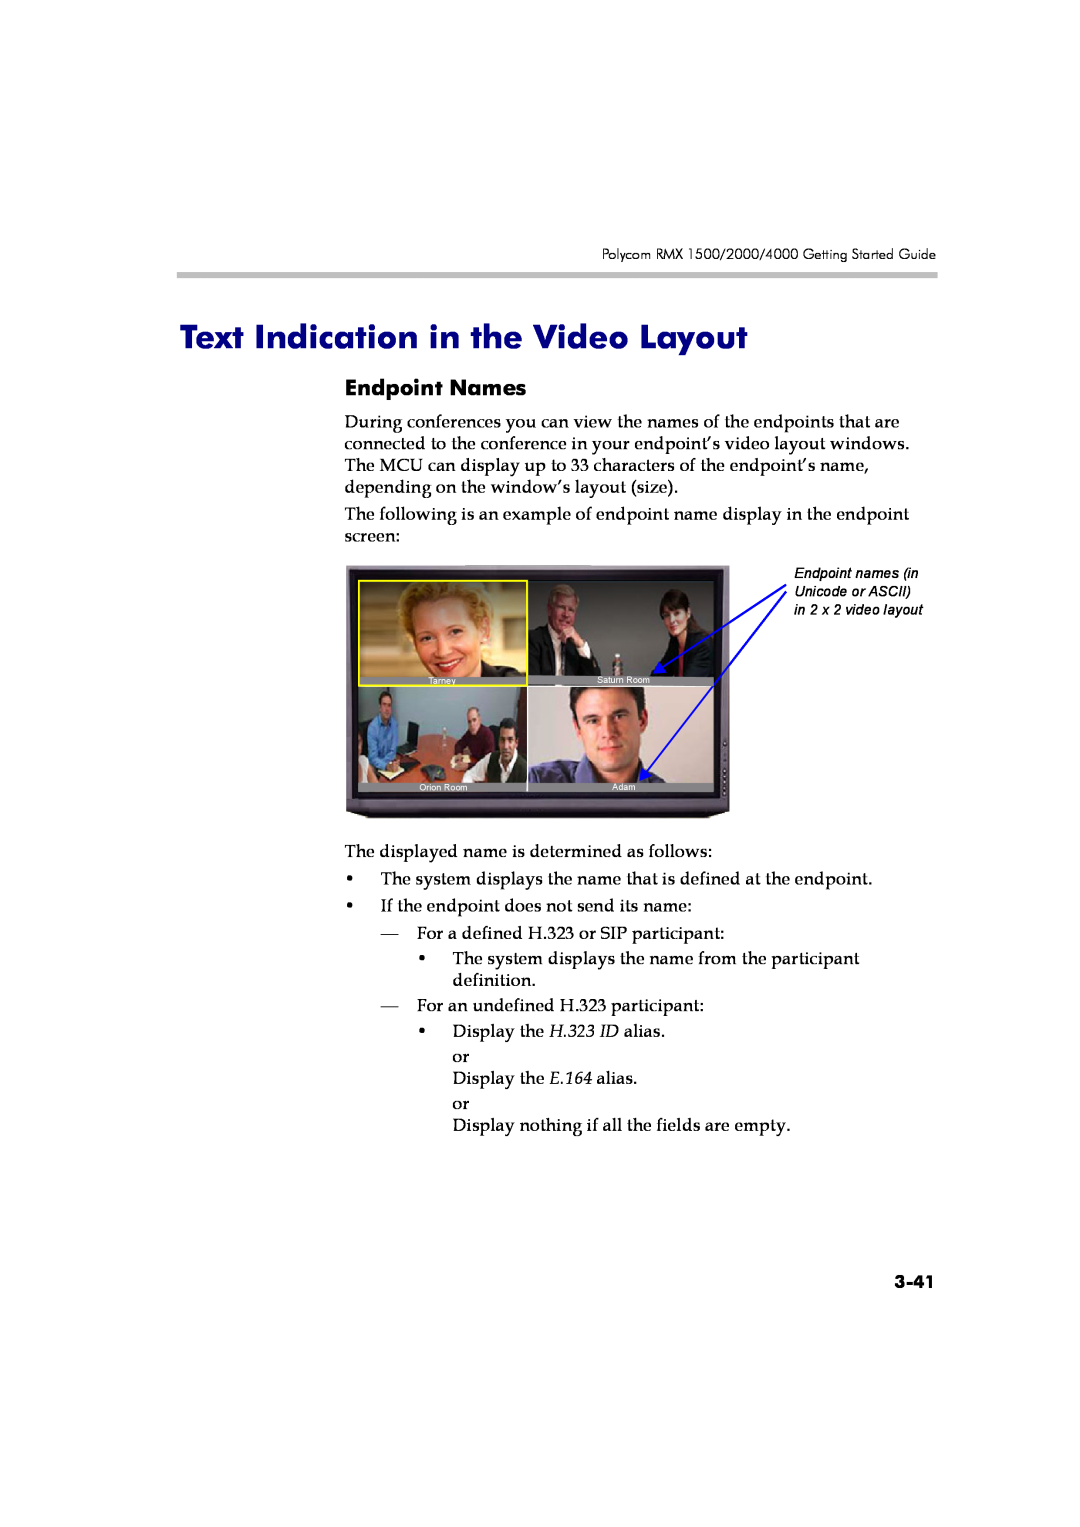 Polycom DOC2560B manual Text Indication in the Video Layout, Endpoint Names, 3-41 